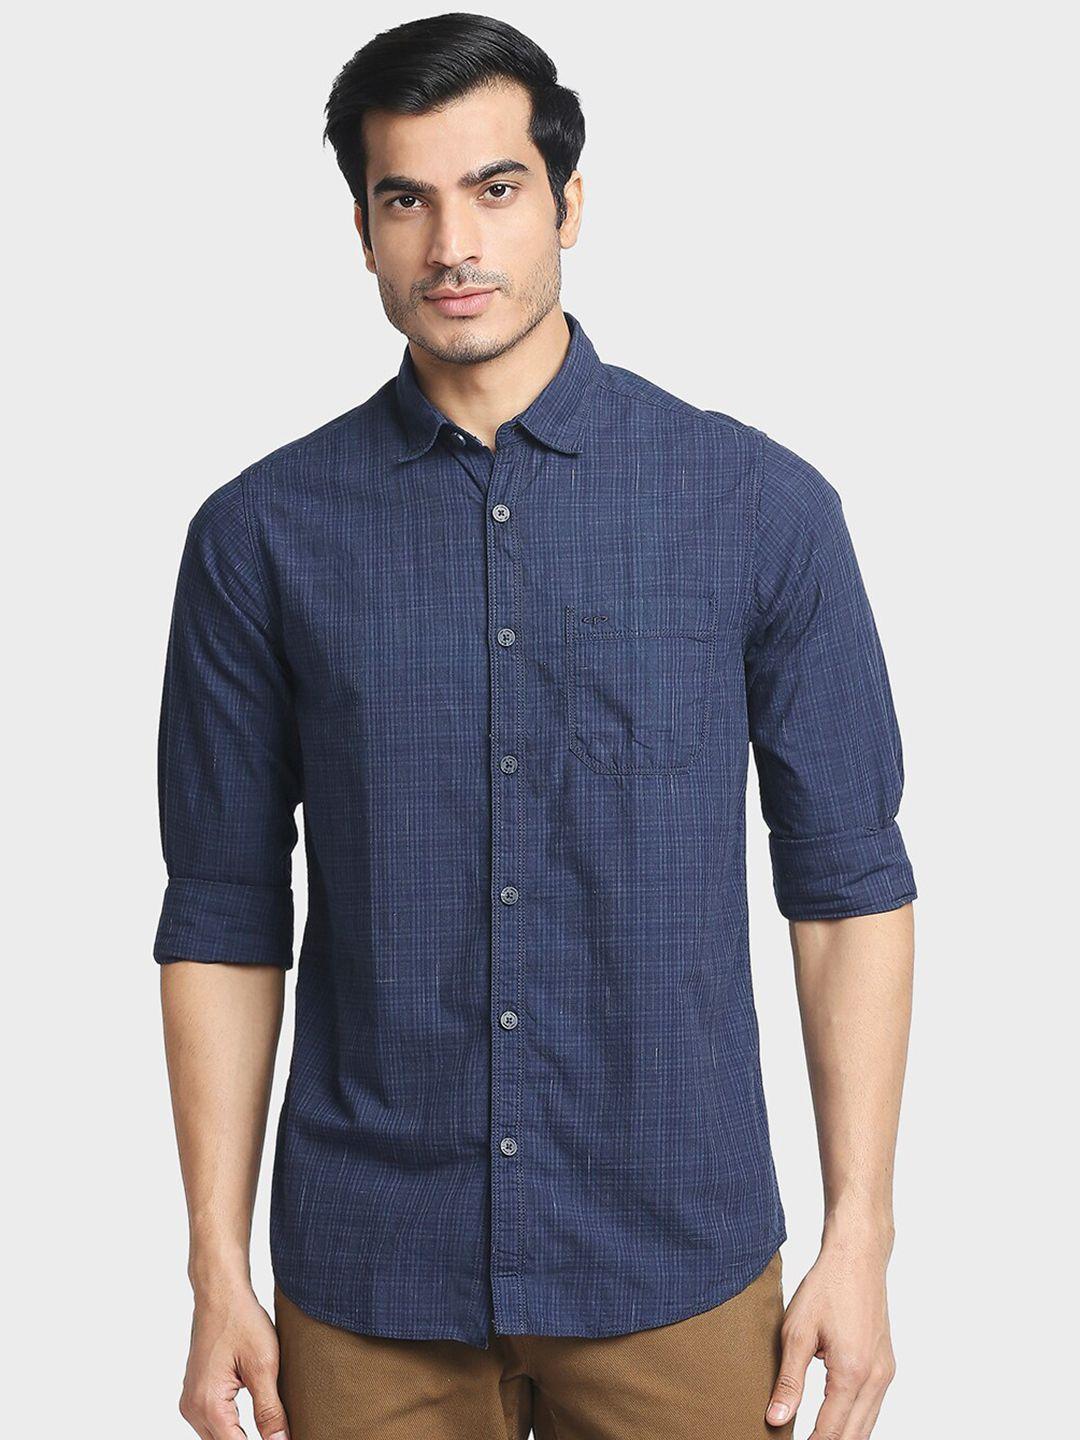 colorplus men blue checked casual shirt